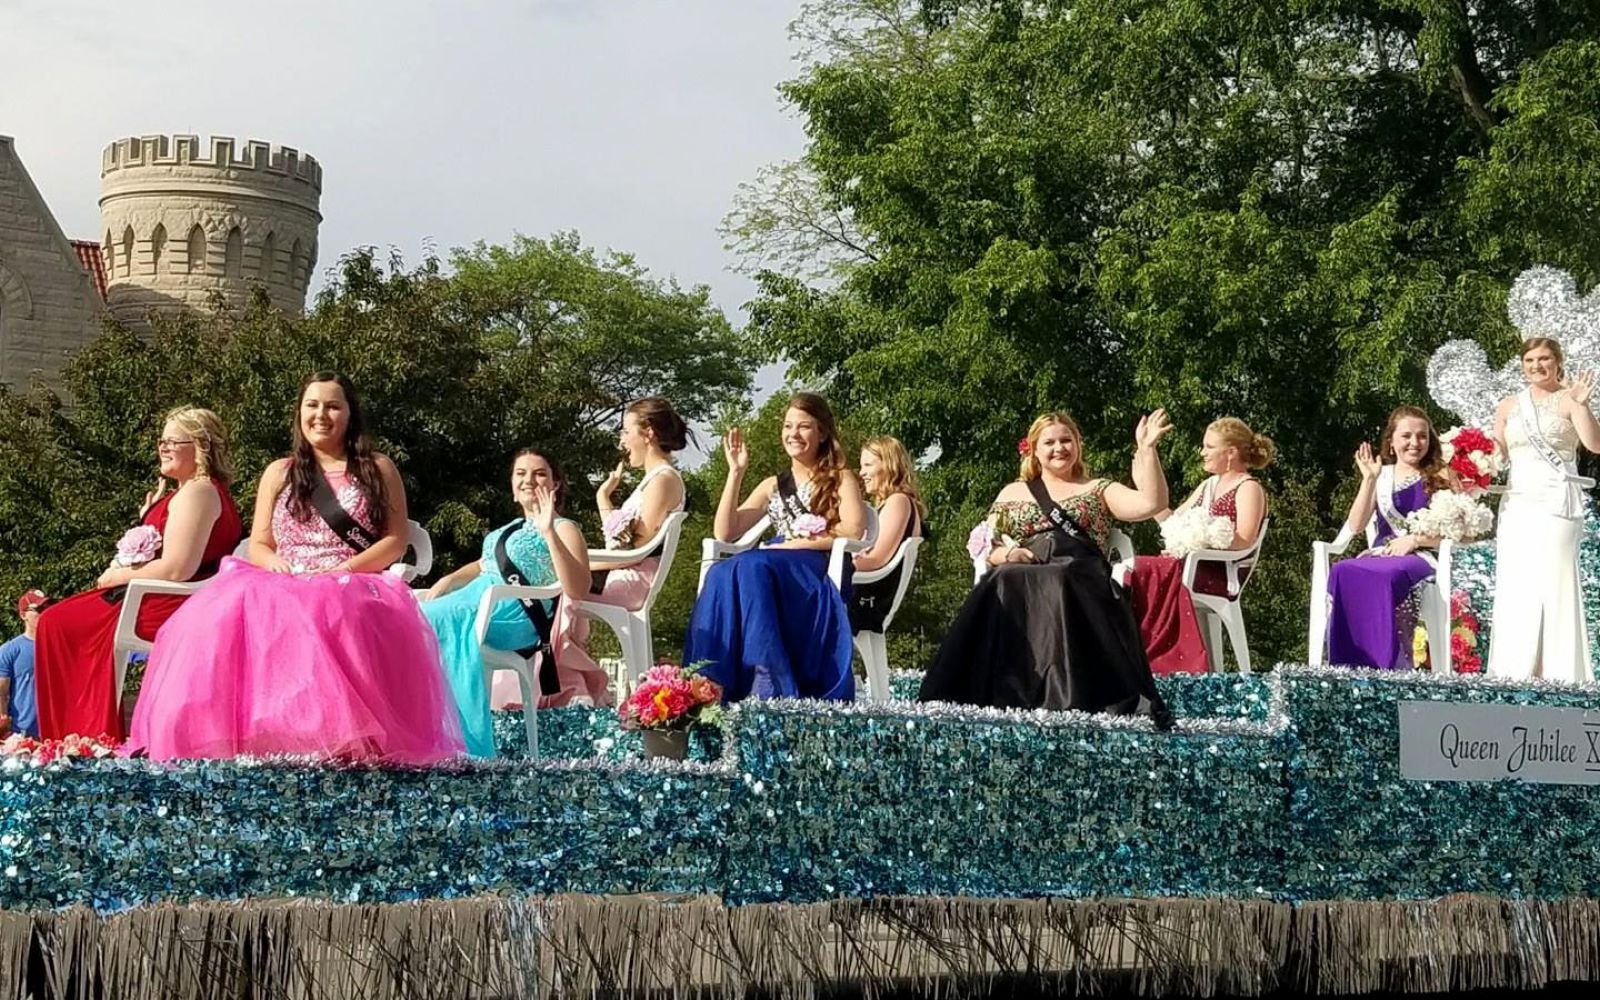 The Peony Festival parade will be at 5 p.m. on Saturday, June 3.